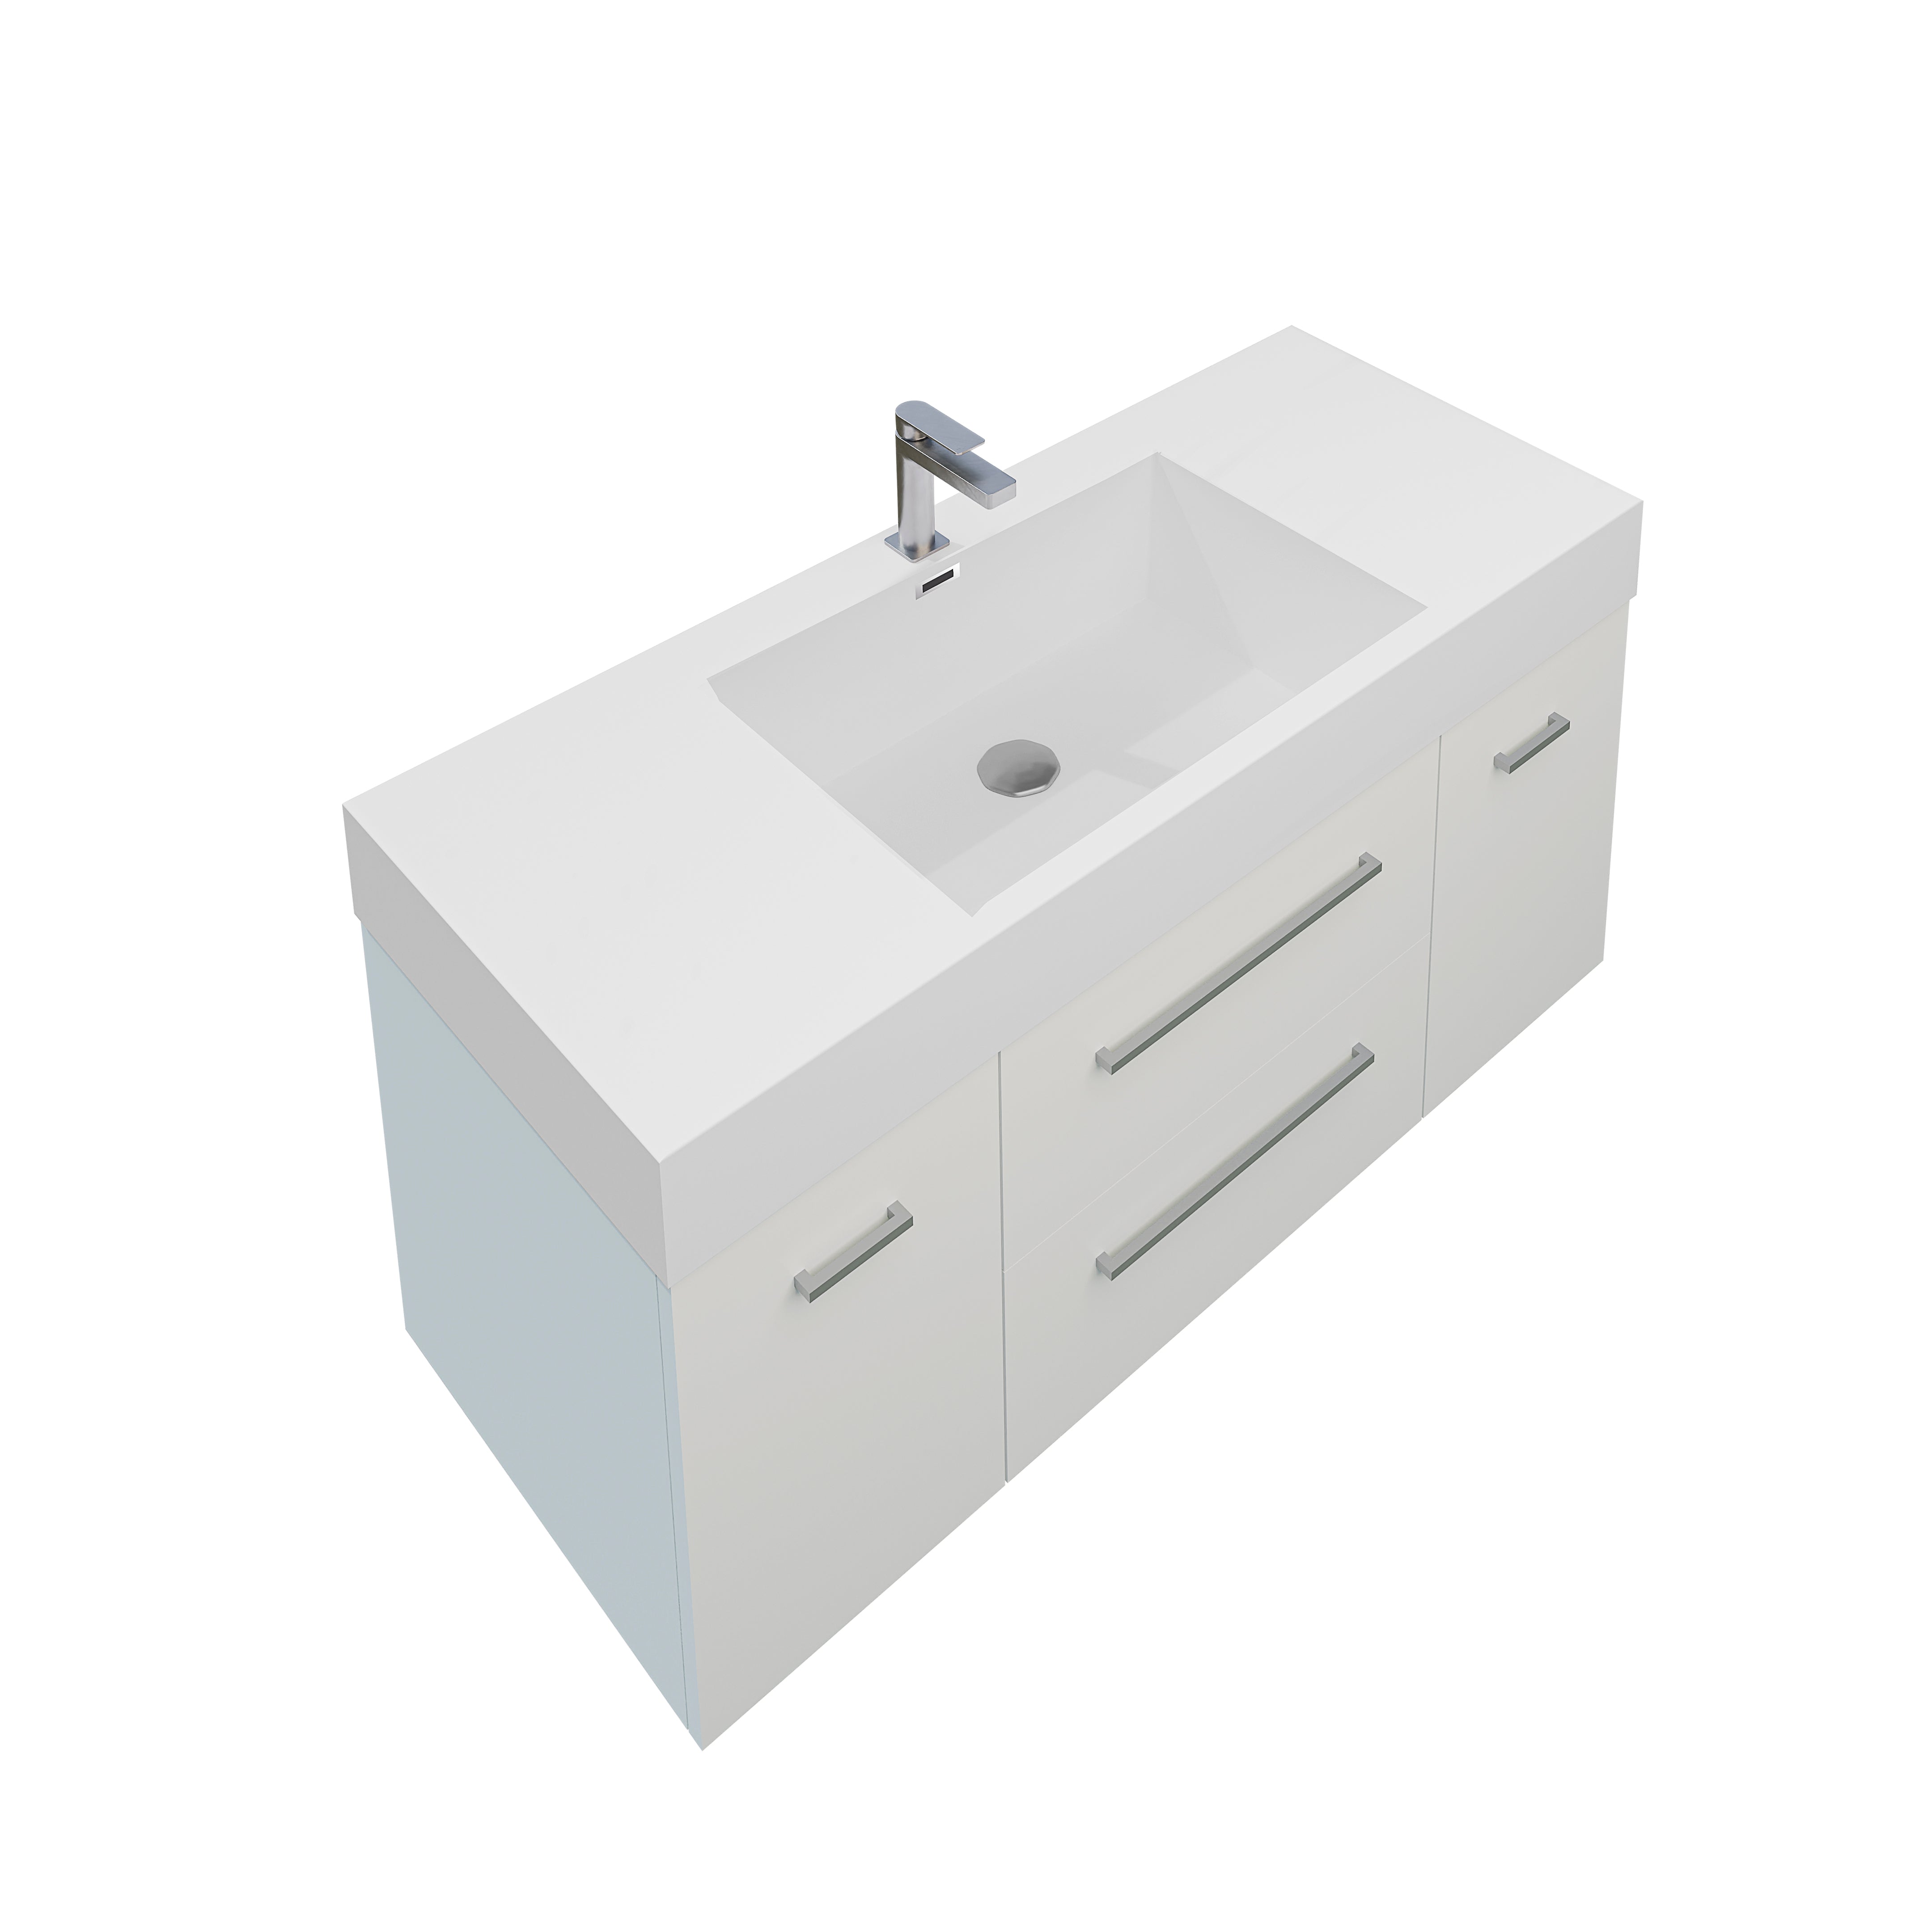 Maya Duo 59 White High Gloss Cabinet, Square Cultured Marble Sink, Wall Mounted Modern Vanity Set